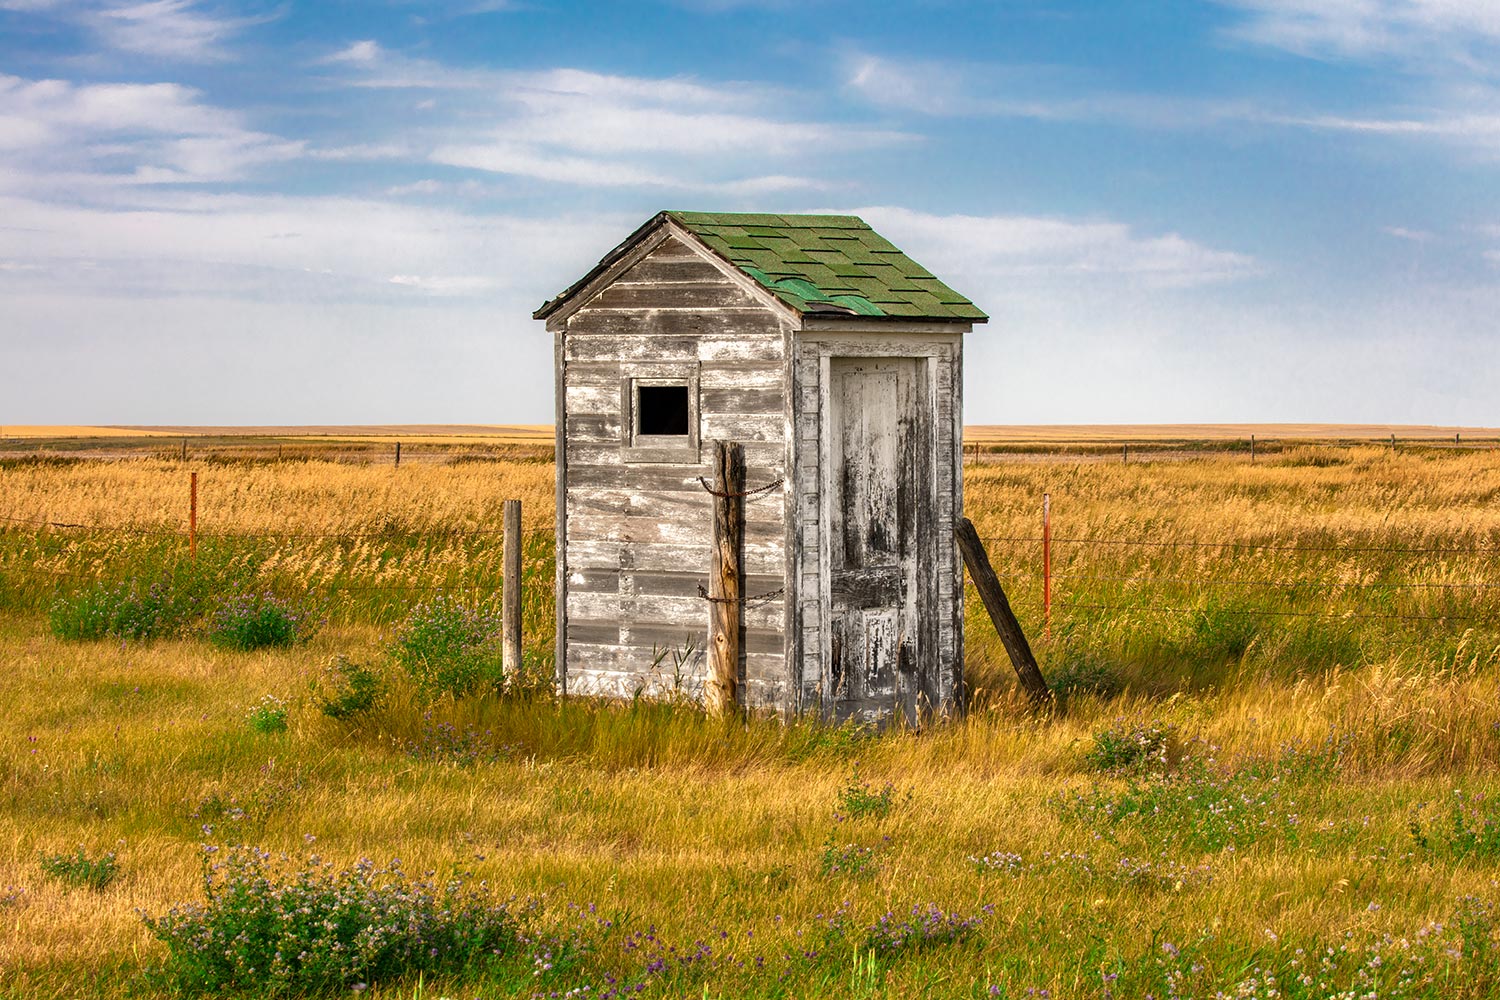 An old forgotten outhouse sits near the school in Pendroy, Montana.&nbsp;&nbsp;→ Buy a Print&nbsp;or License Photo